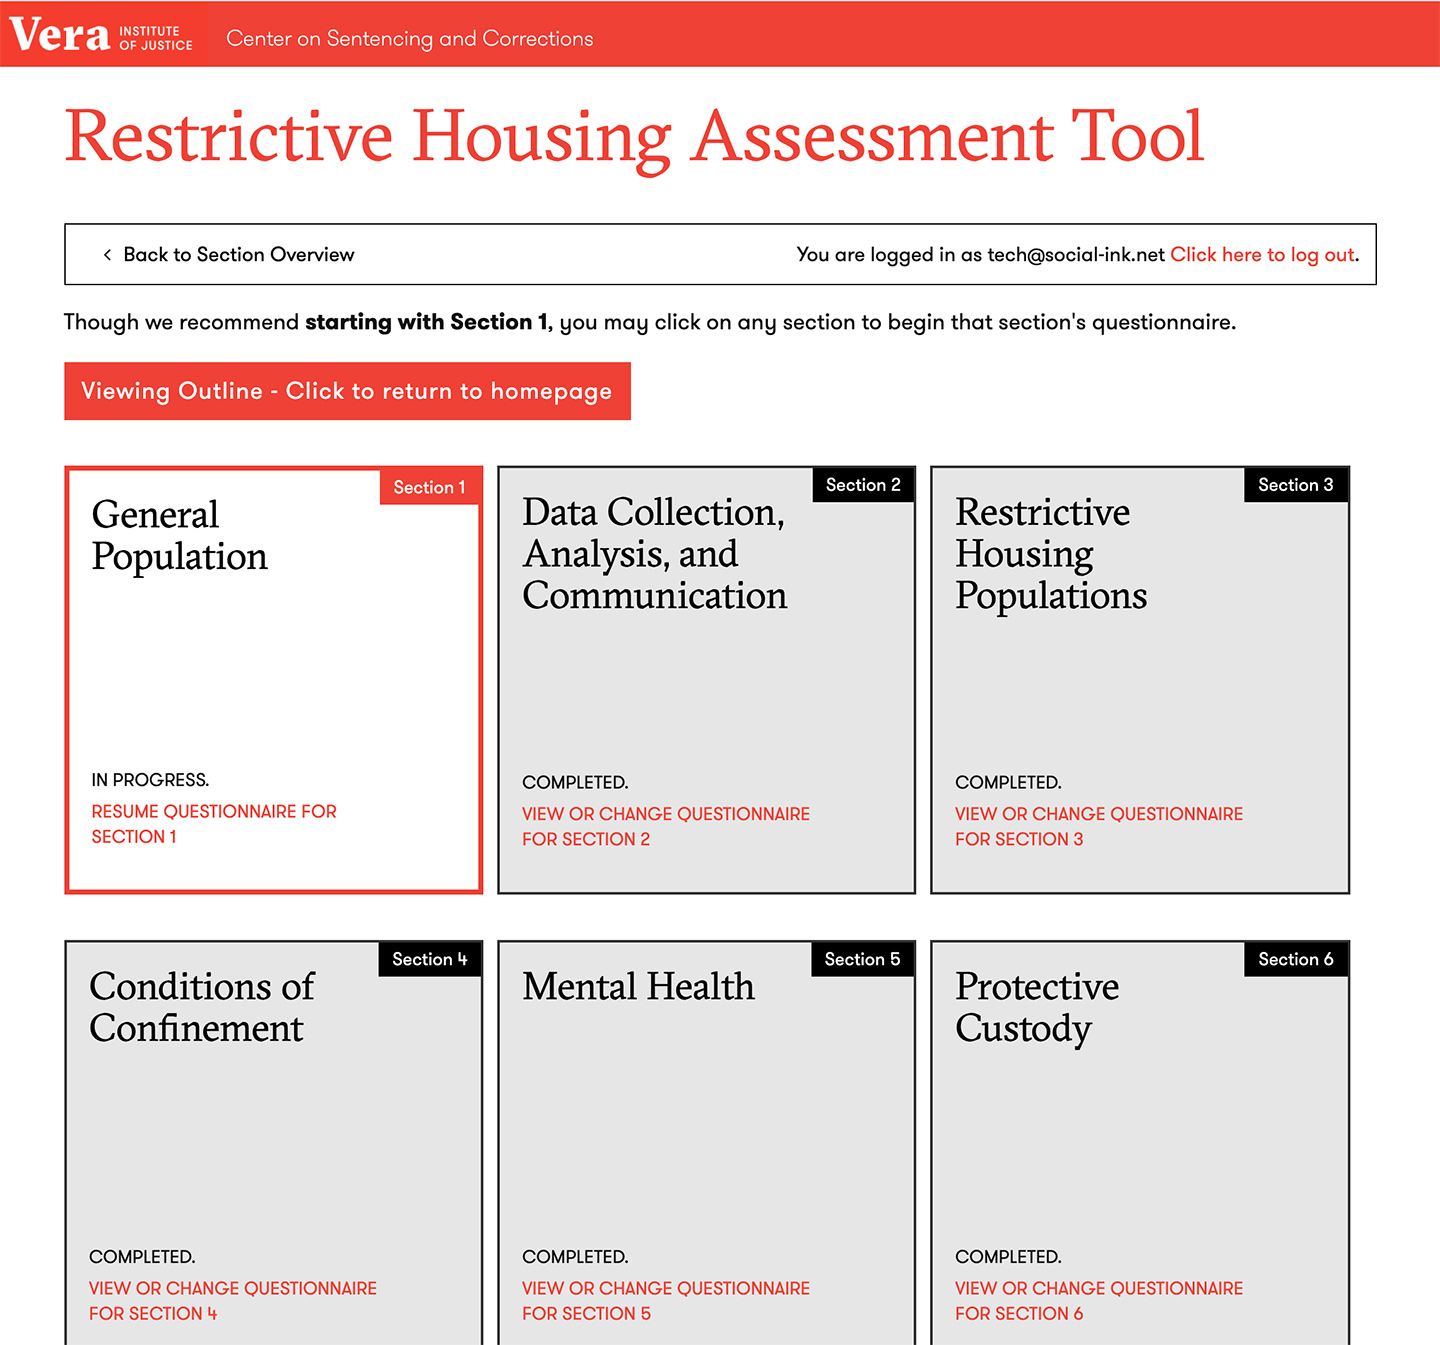 Restrictive Housing Assessment Tool from the Vera Institute of Justice: Restrictive Housing Assessment Tool - Overview Grid